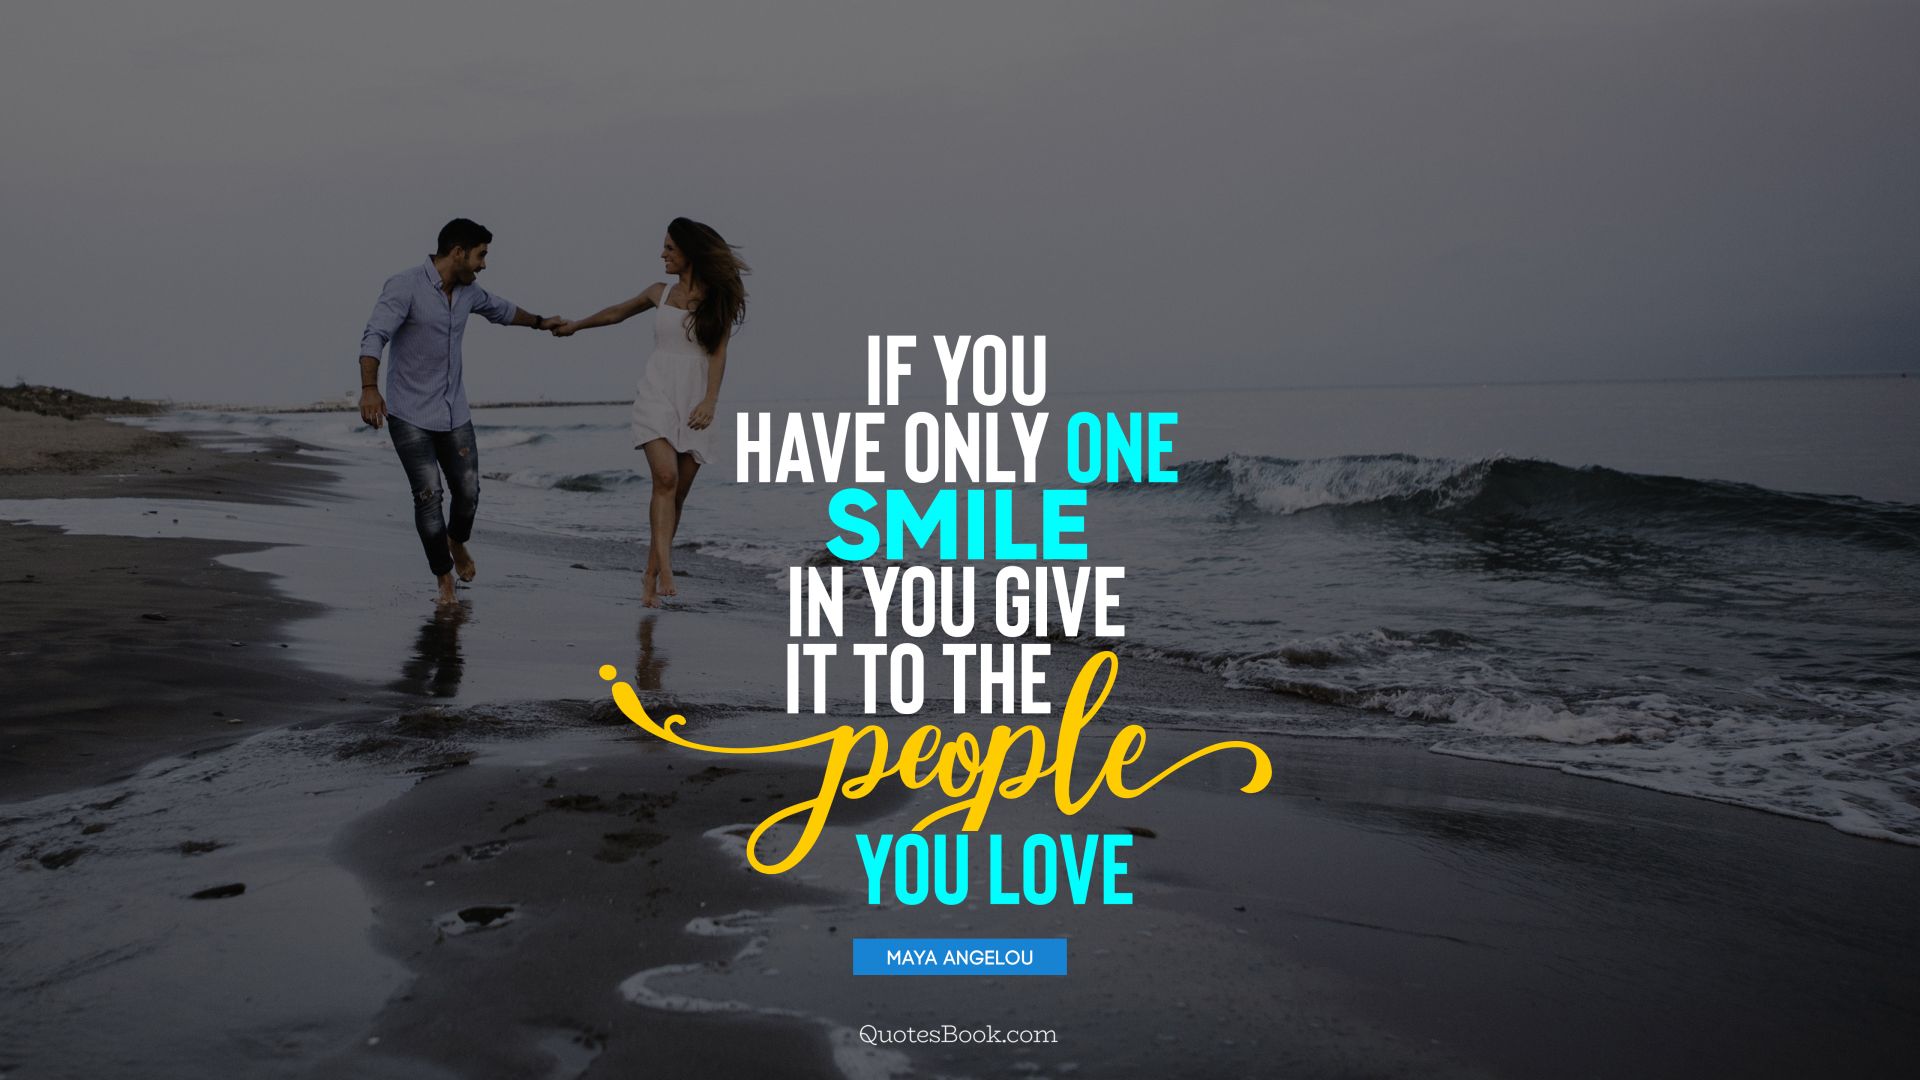 If you have only one smile in you give it to the people you love. - Quote by Maya Angelou